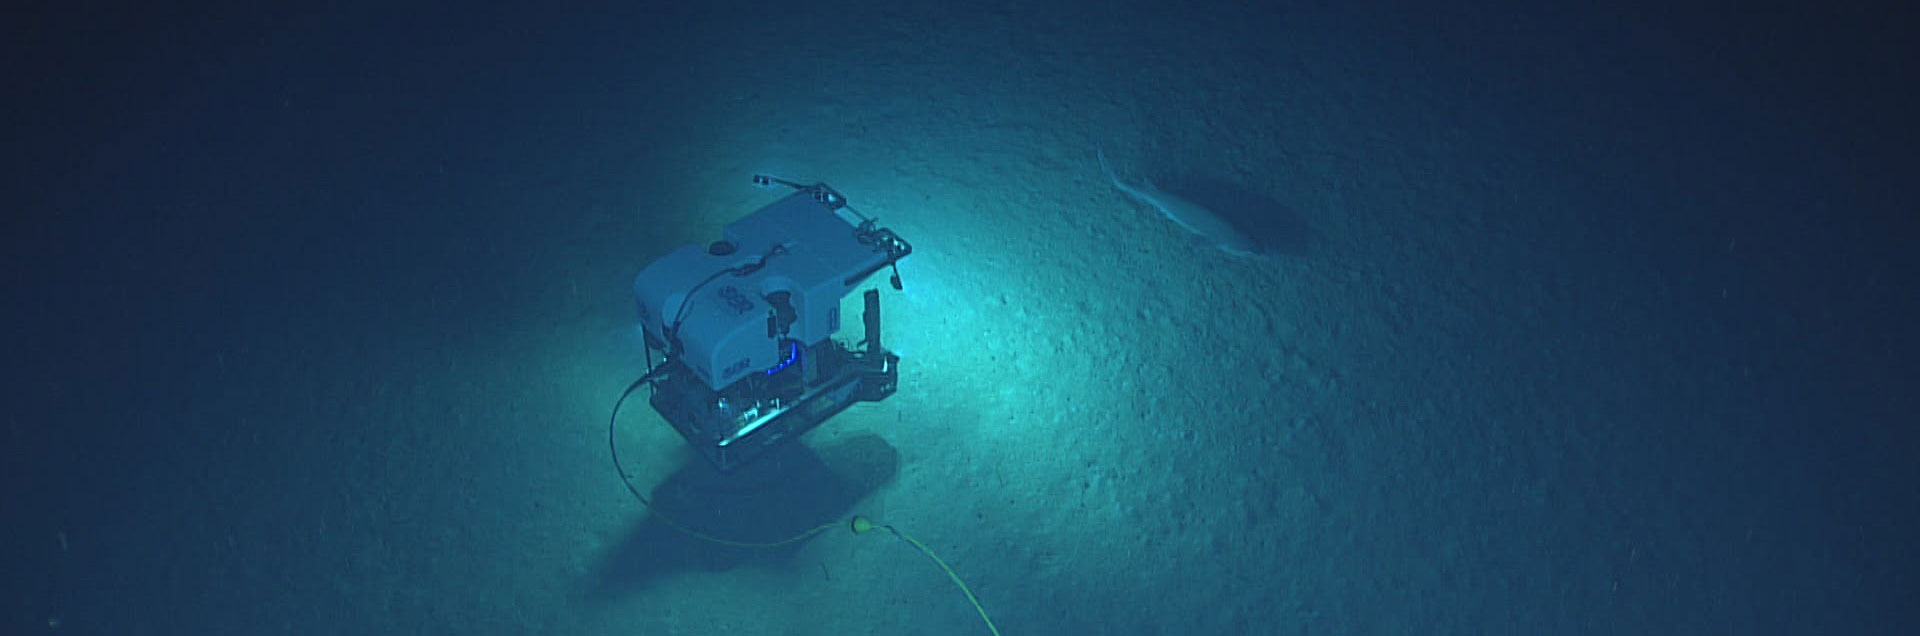 View of the Hexanchus sp. shark and ROV Deep Discoverer as seen from Seirios during Dive 6 of the 2018 Exploring Deep-sea Habitats off Puerto Rico and the U.S. Virgin Islands expedition.